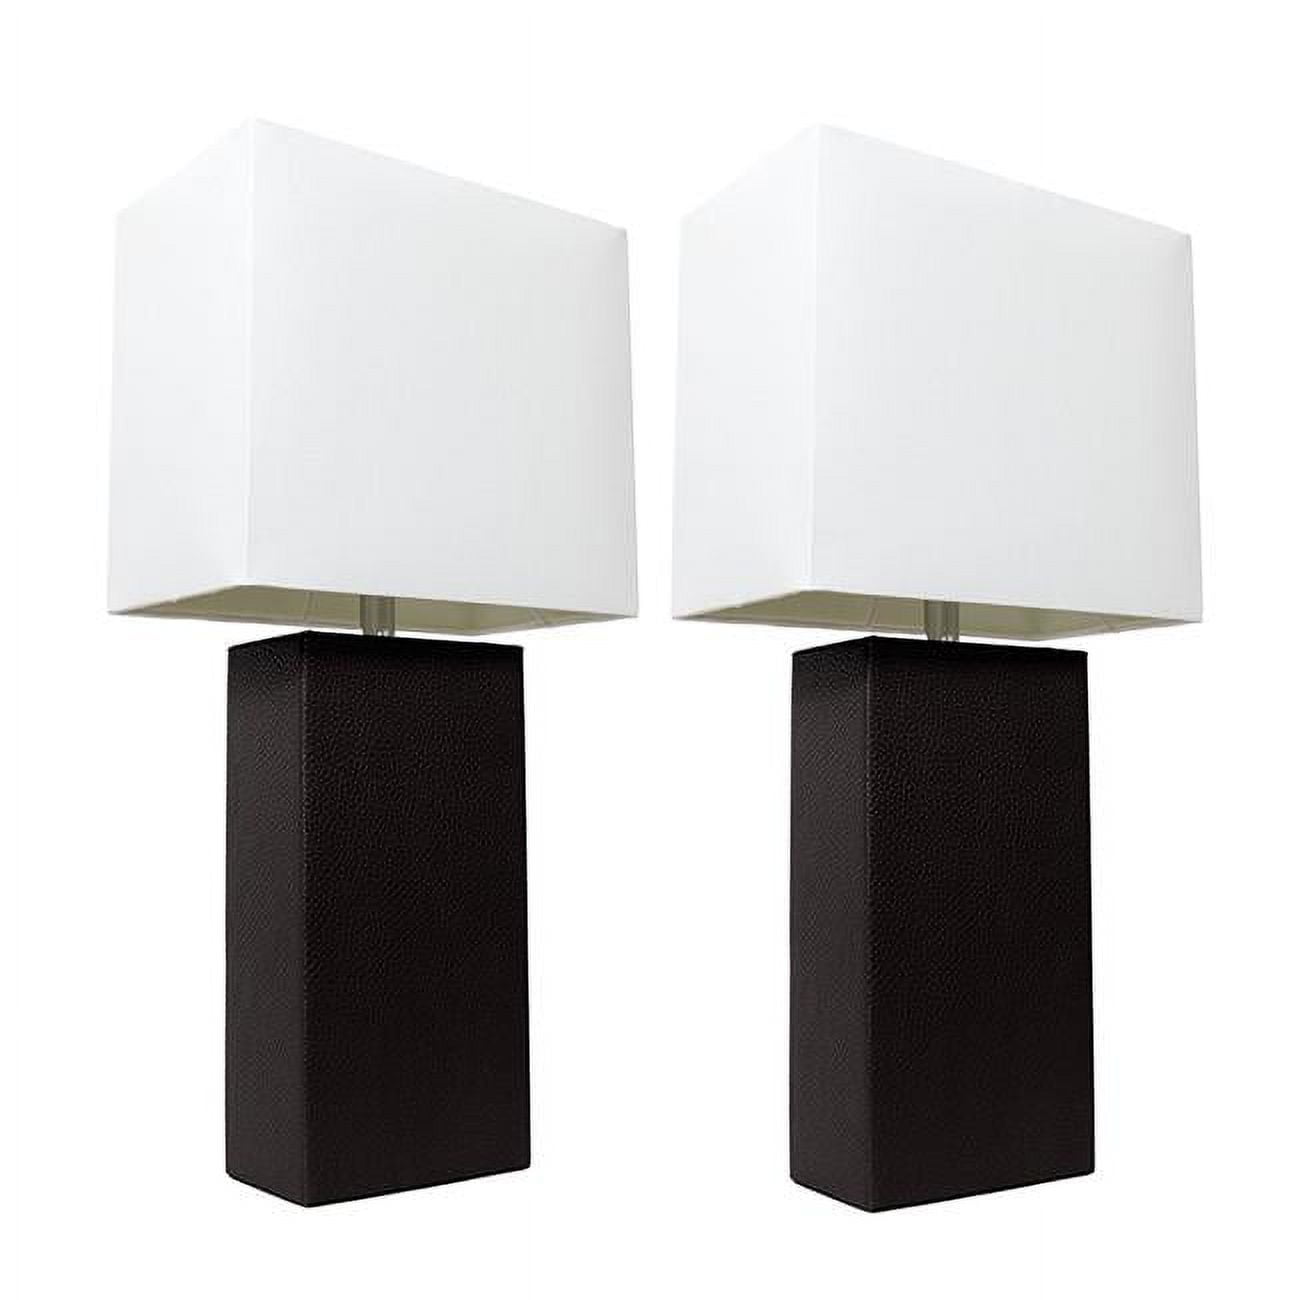 Alltherages Lc2000-blk-2pk Elegant Designs Modern Leather Table Lamp With White Fabric Shade - Black, Pack Of 2